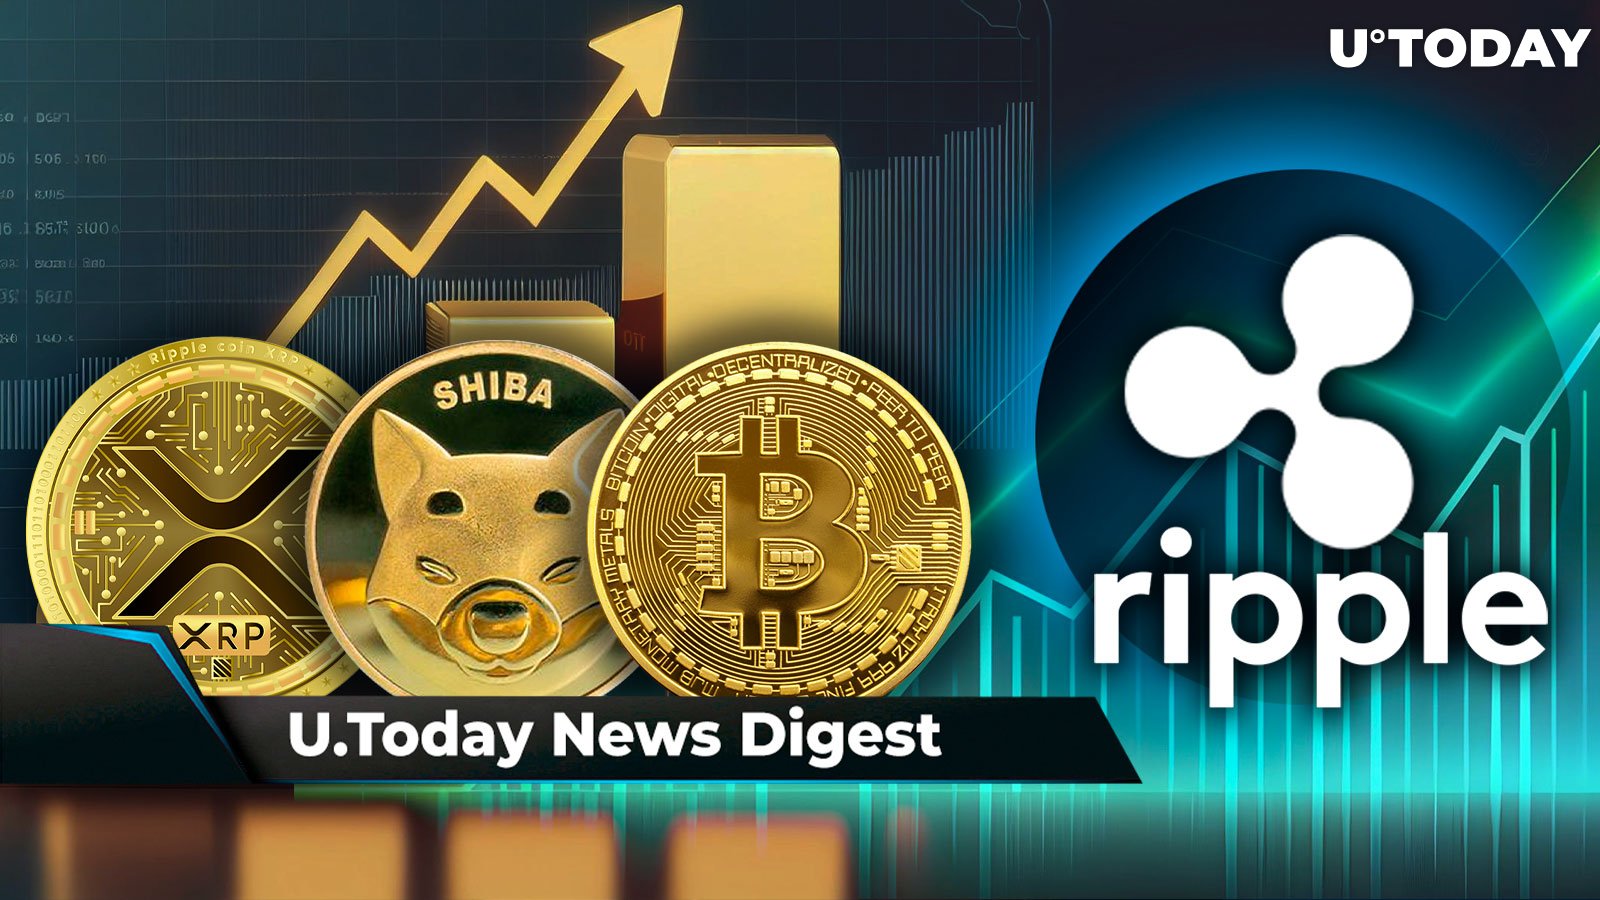 XRP Jumps 20% After Mysterious Binance Transfers as Crypto Rally Expands to Laggards